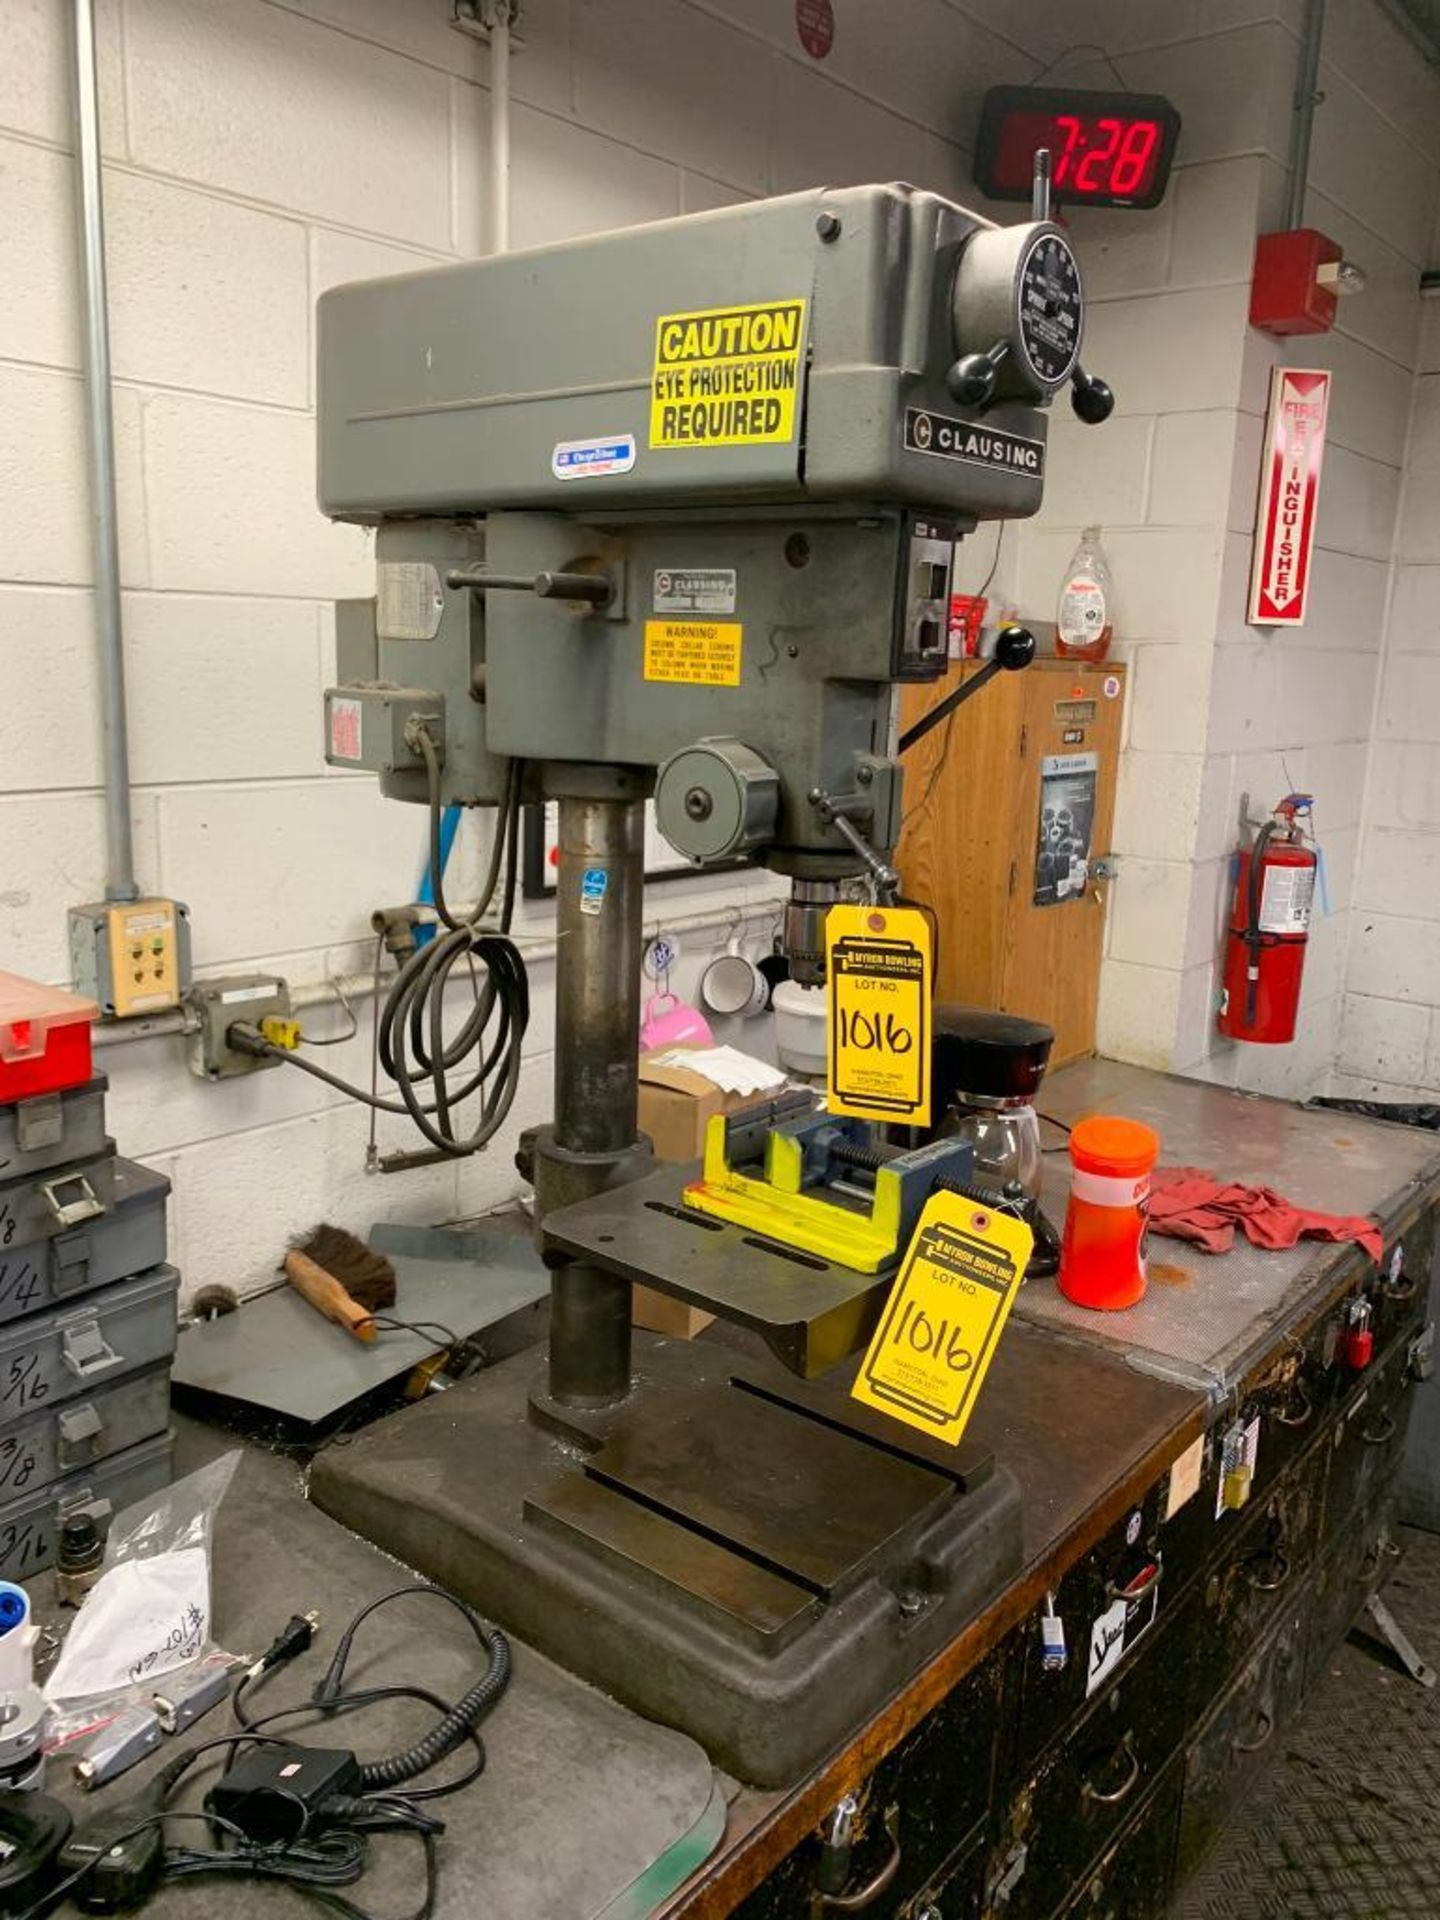 Clausing Tabletop Drill Press, Model 1680, 10" X 14" Table, Palmgren 4" Machine Vice, S/N 531293 - Image 2 of 5